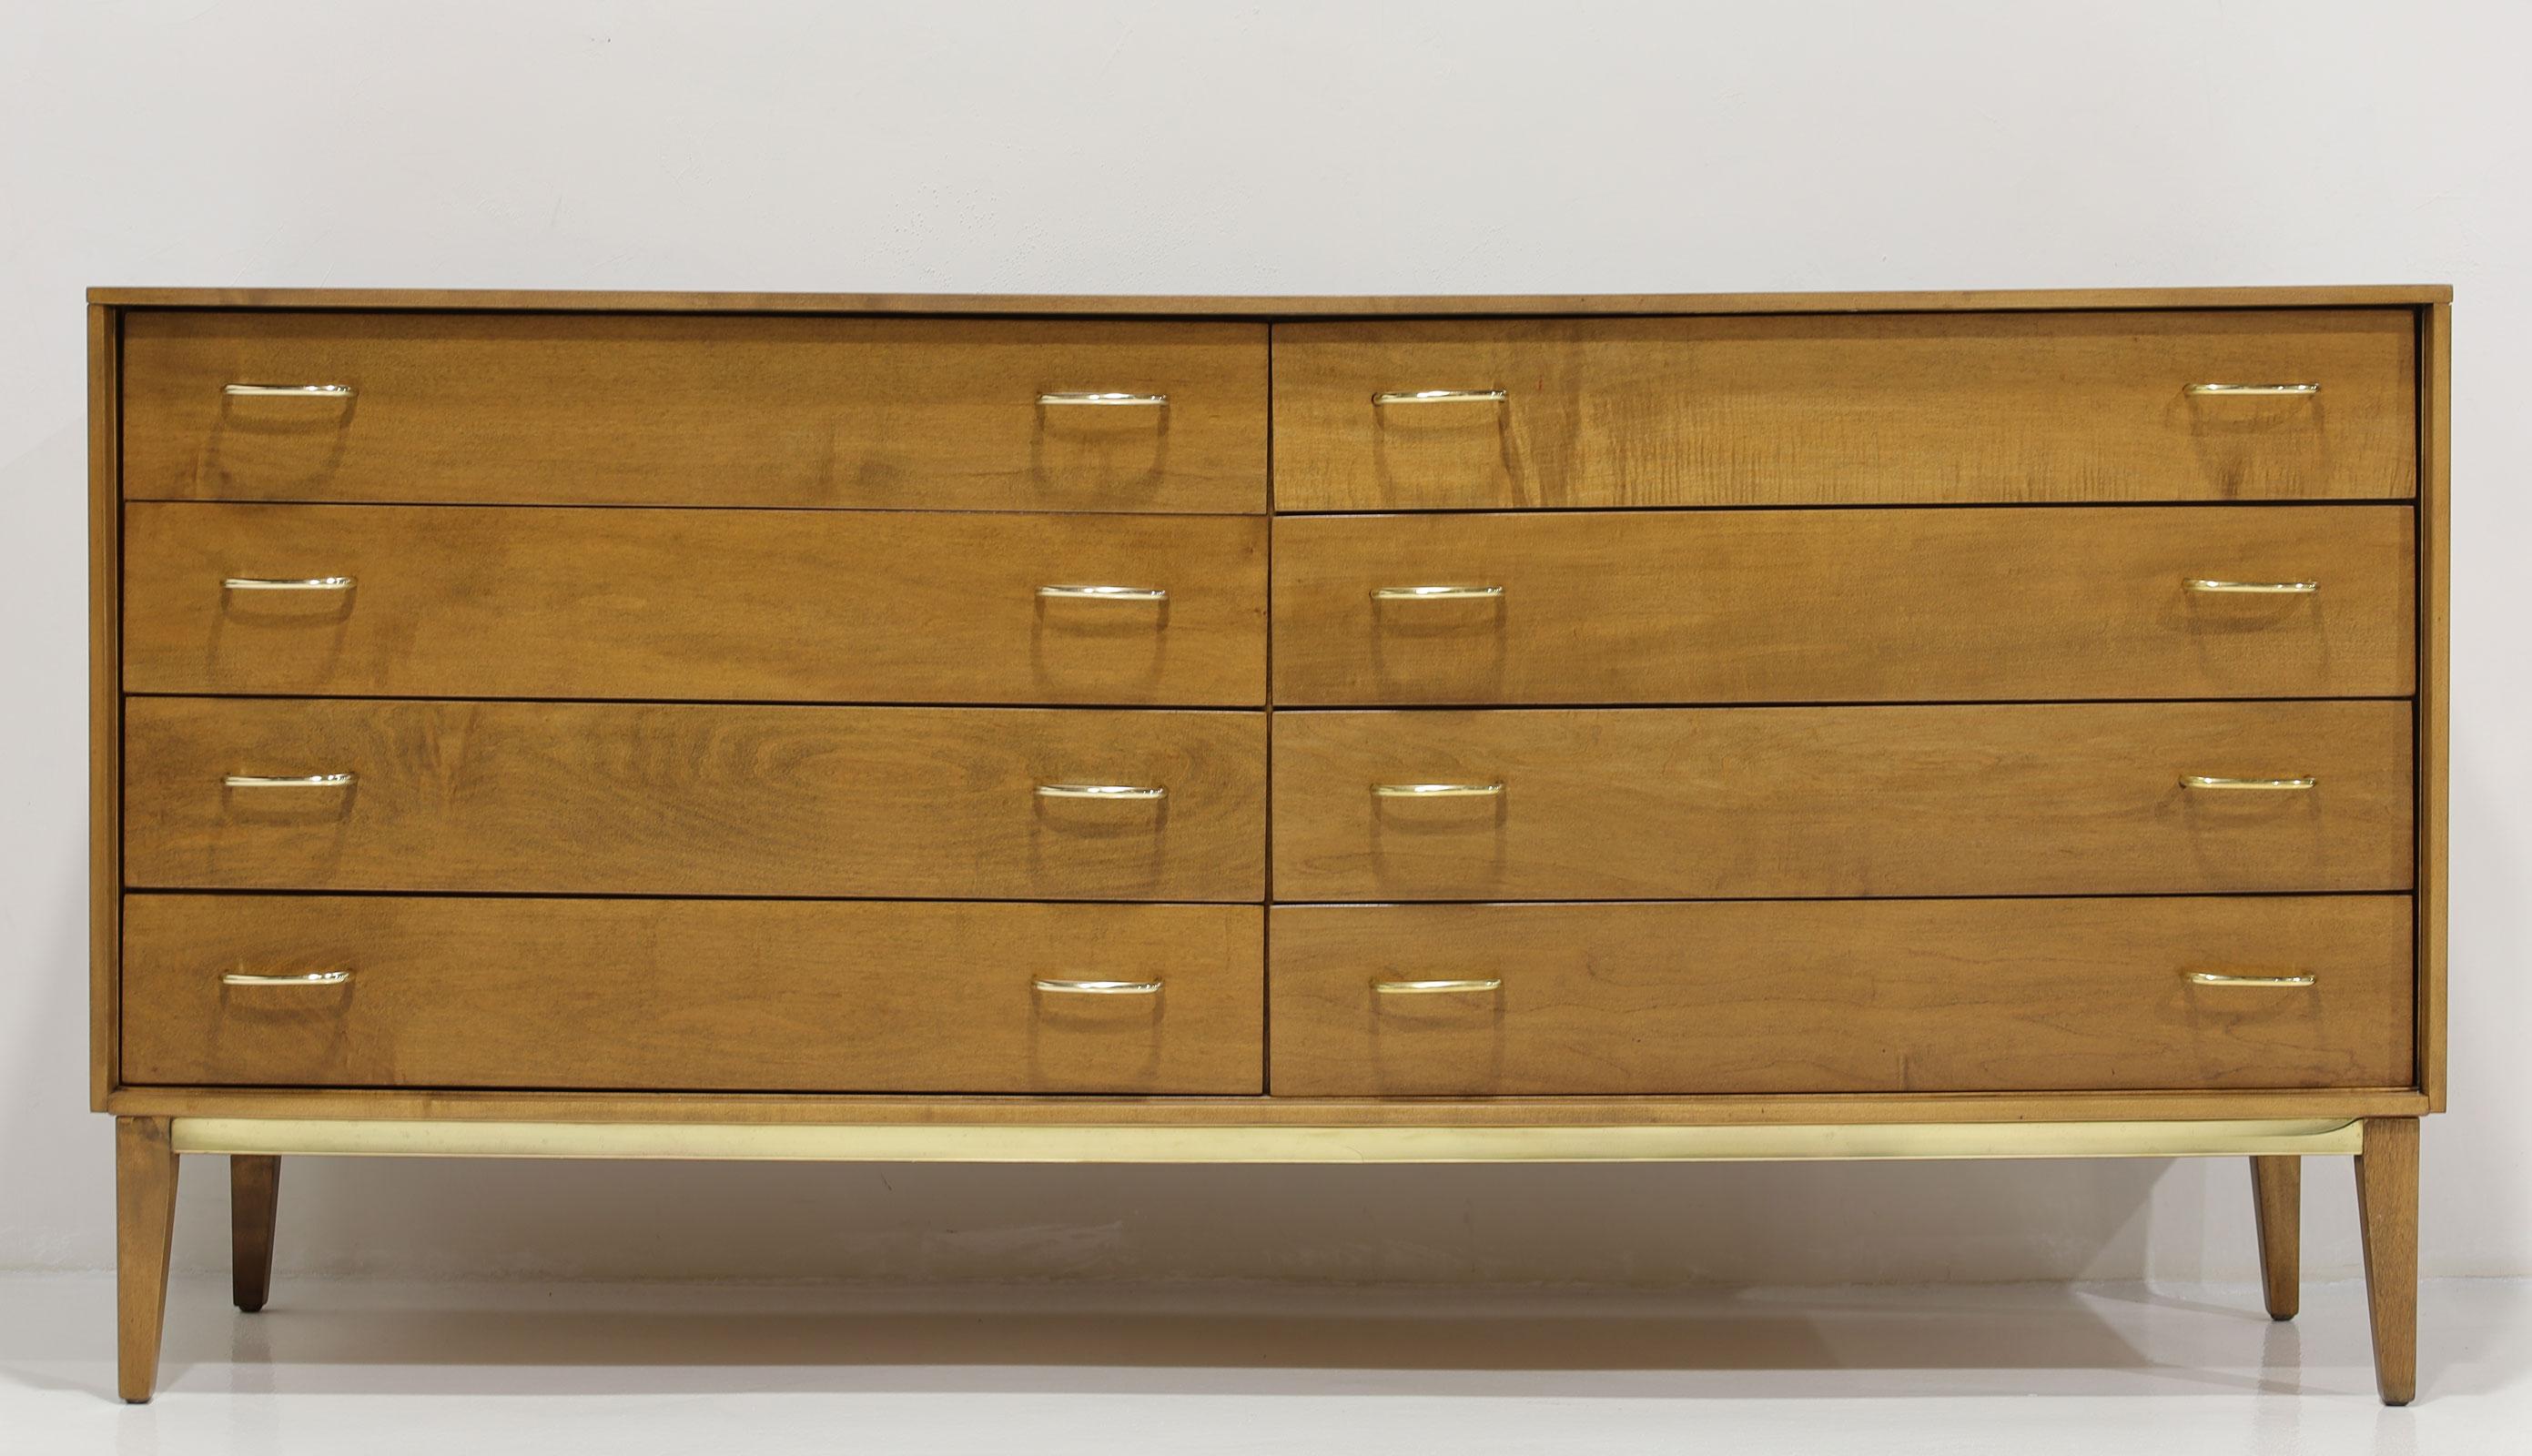 This is a lovely clean lined mid-century dresser made very well. The handles and trim are solid brass and we have polished them to bring back their old glory. A beautiful piece for an entrance, bedroom or hallway. They don't make them like this